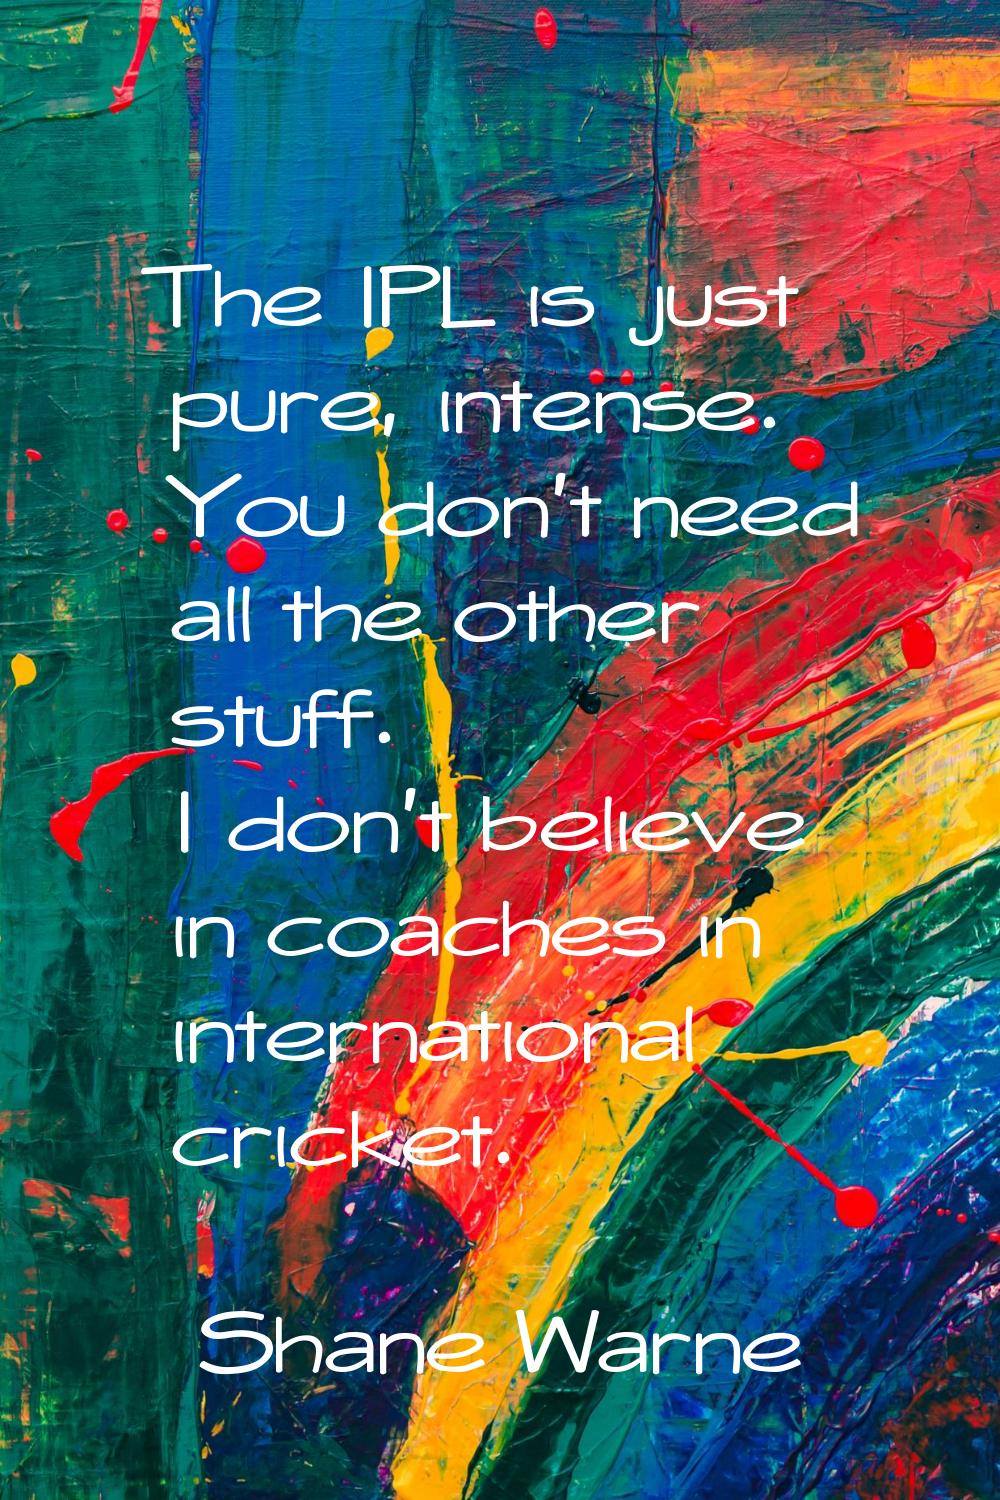 The IPL is just pure, intense. You don't need all the other stuff. I don't believe in coaches in in